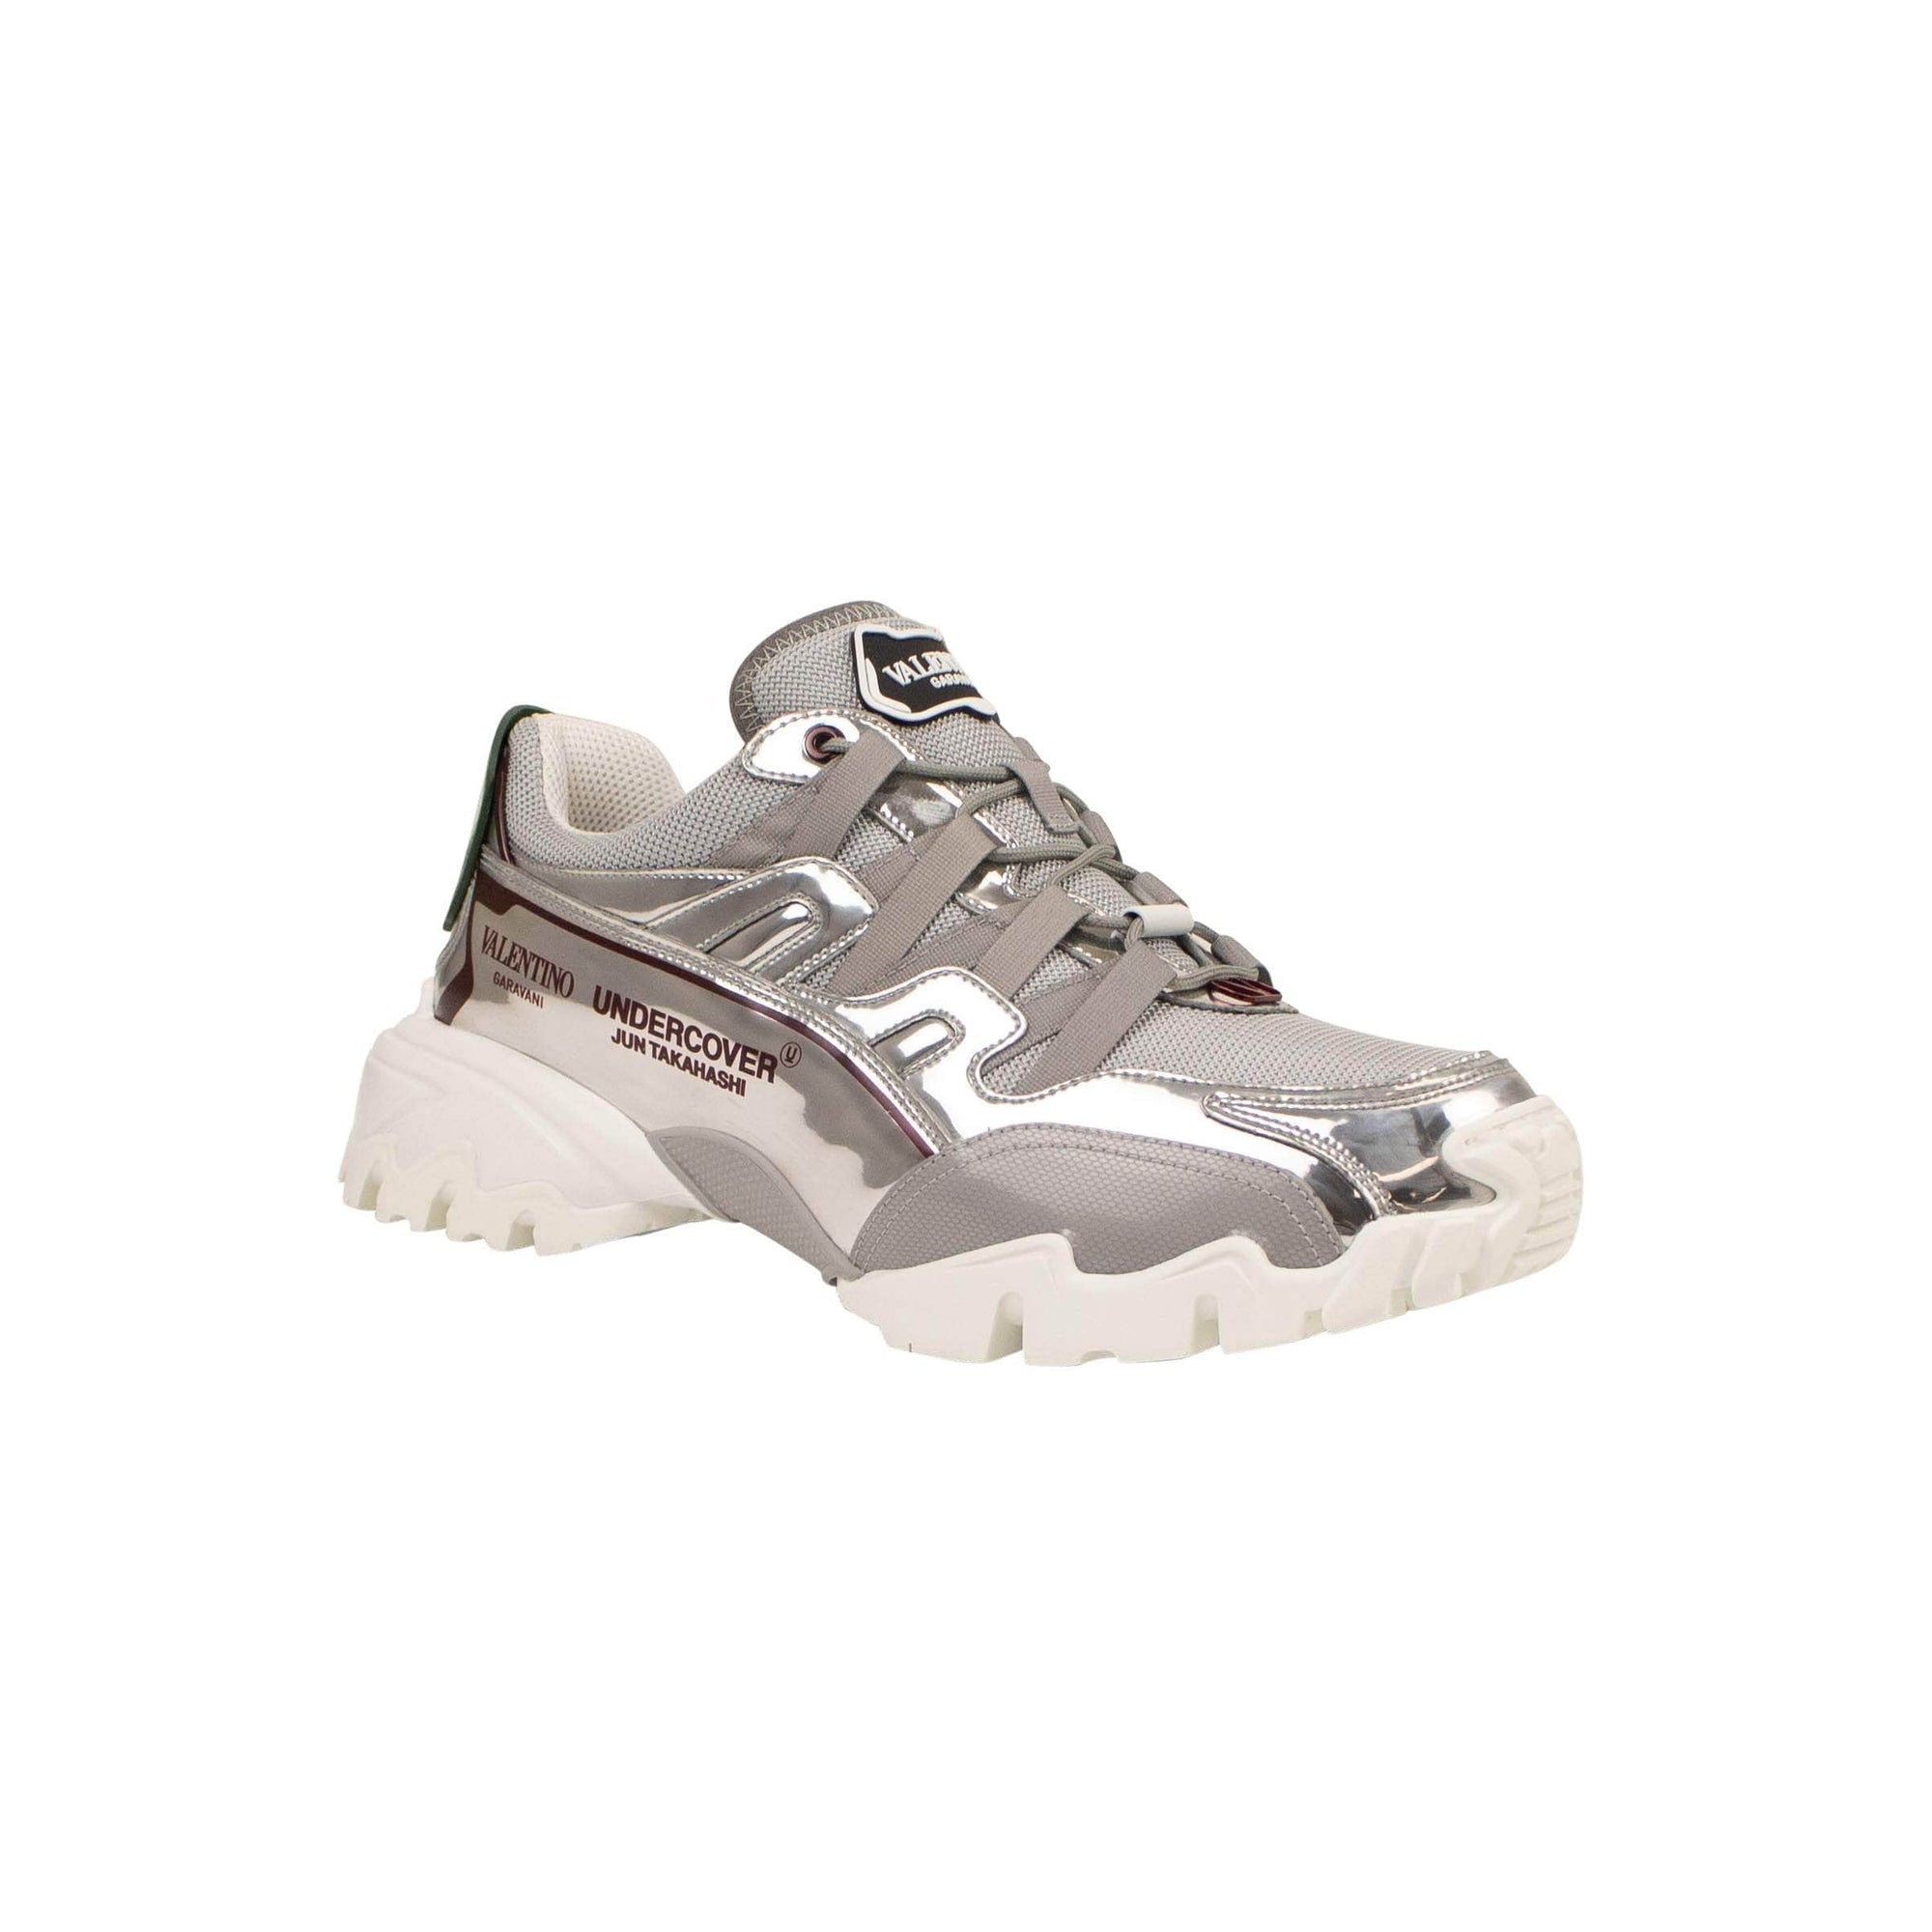 Valentino x Undercover 750-1000, channelenable-all, chicmi, couponcollection, gender-mens, main-shoes, size-40, size-41, size-42, size-43, valentino-x-undercover Silver Climber Sneakers